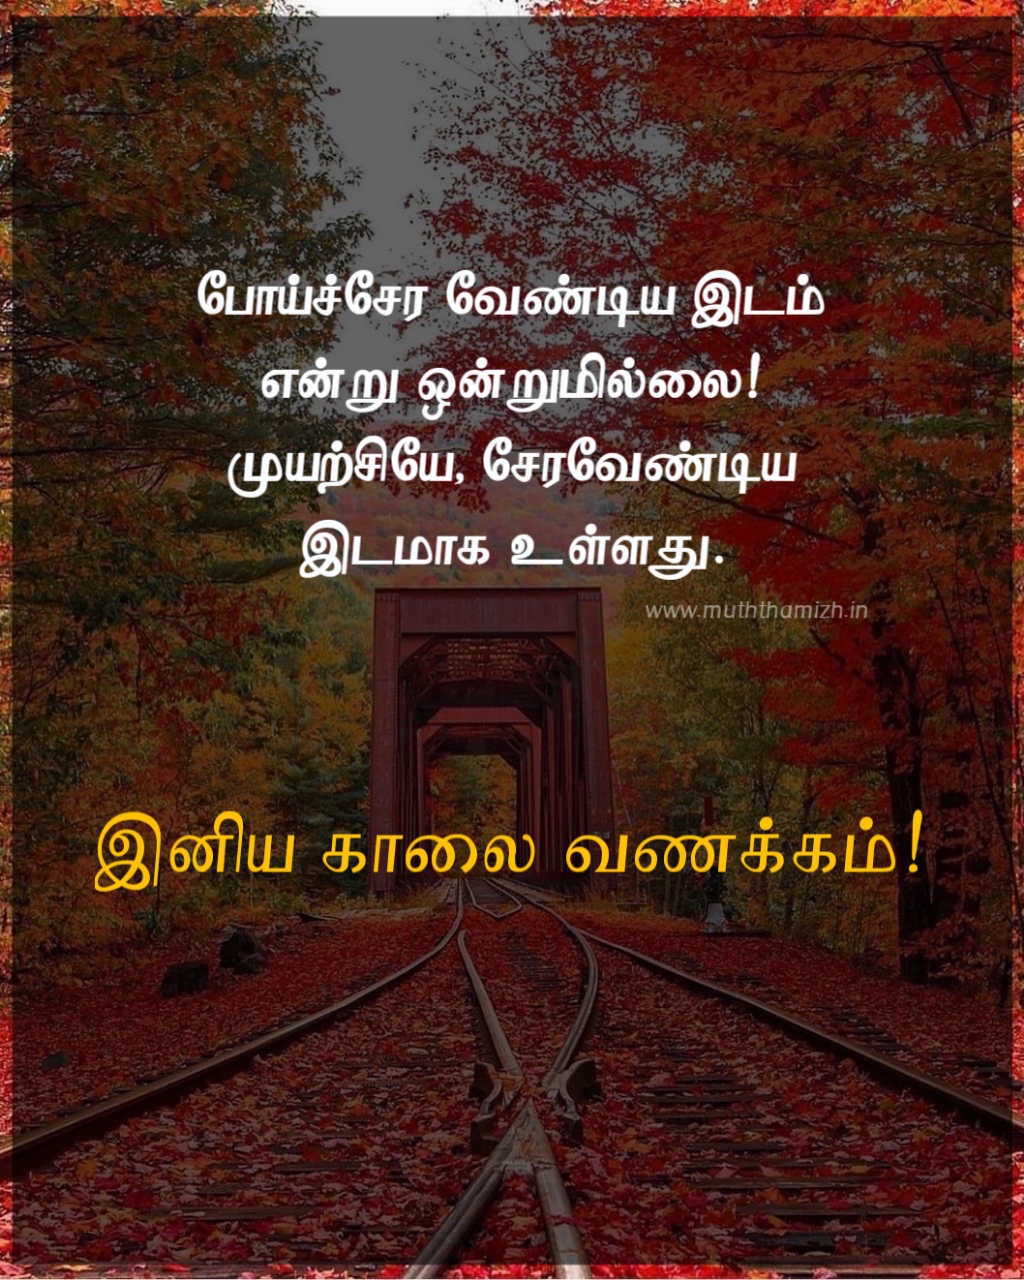 good morning wishes in tamil